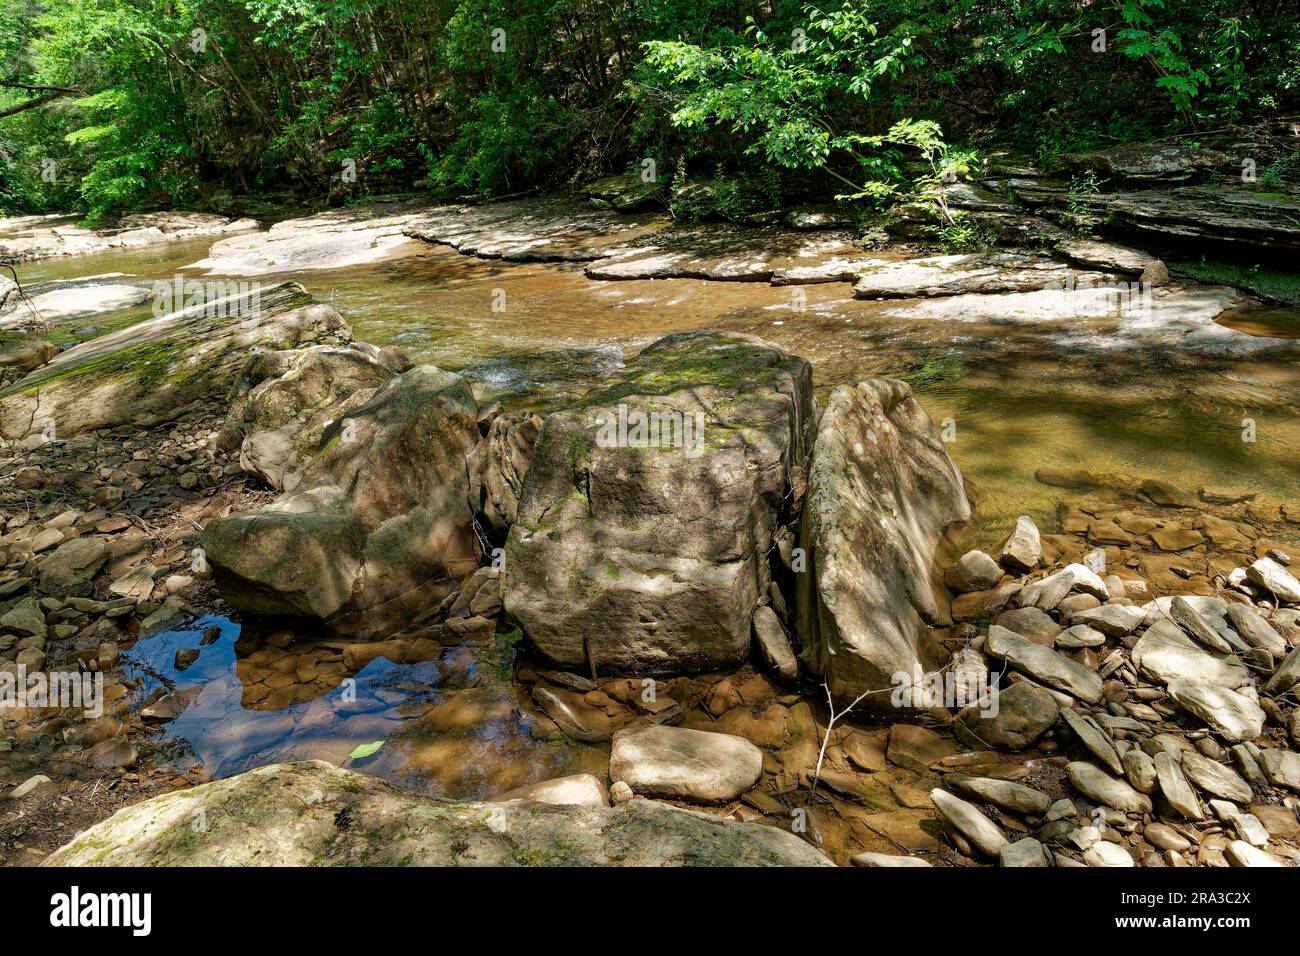 Big boulders in a row in the middle of the shallow creek surrounded by rocks and flowing water in the mountain forest on a sunny day Stock Photo